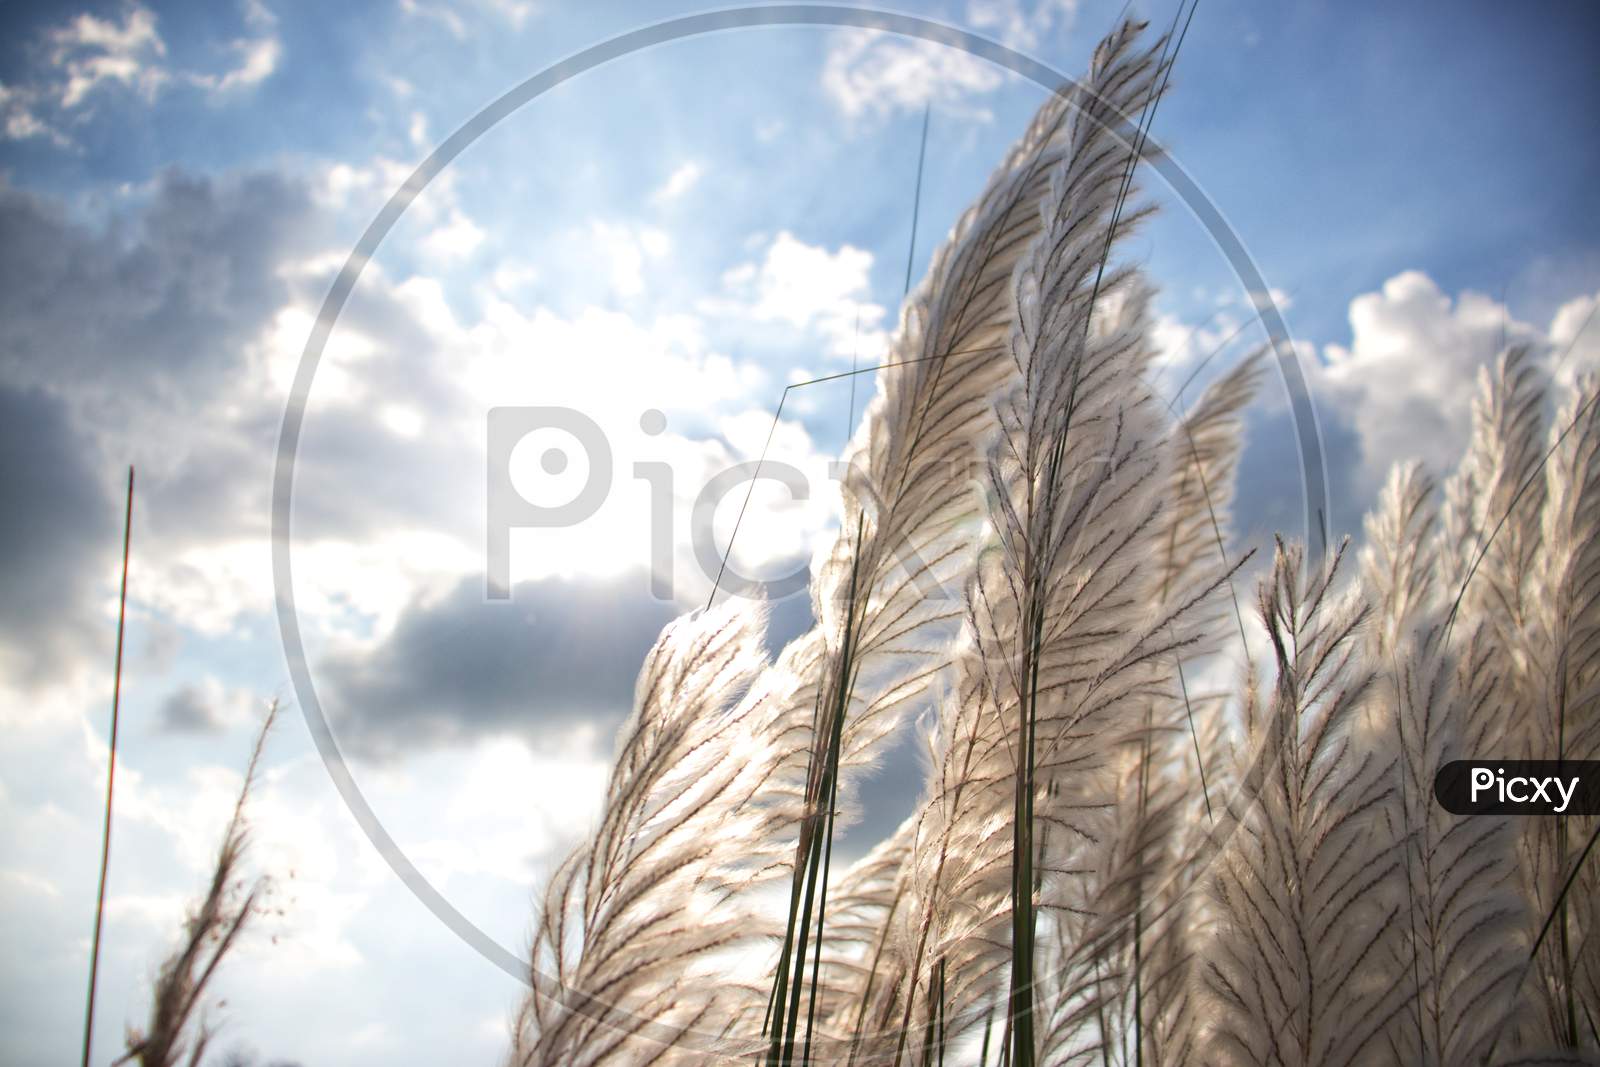 Saccharum Spontaneum Or Wild Sugarcane  In Daylight With Sun And Clouds, Also Known As Kans Grass Or Kash Phool